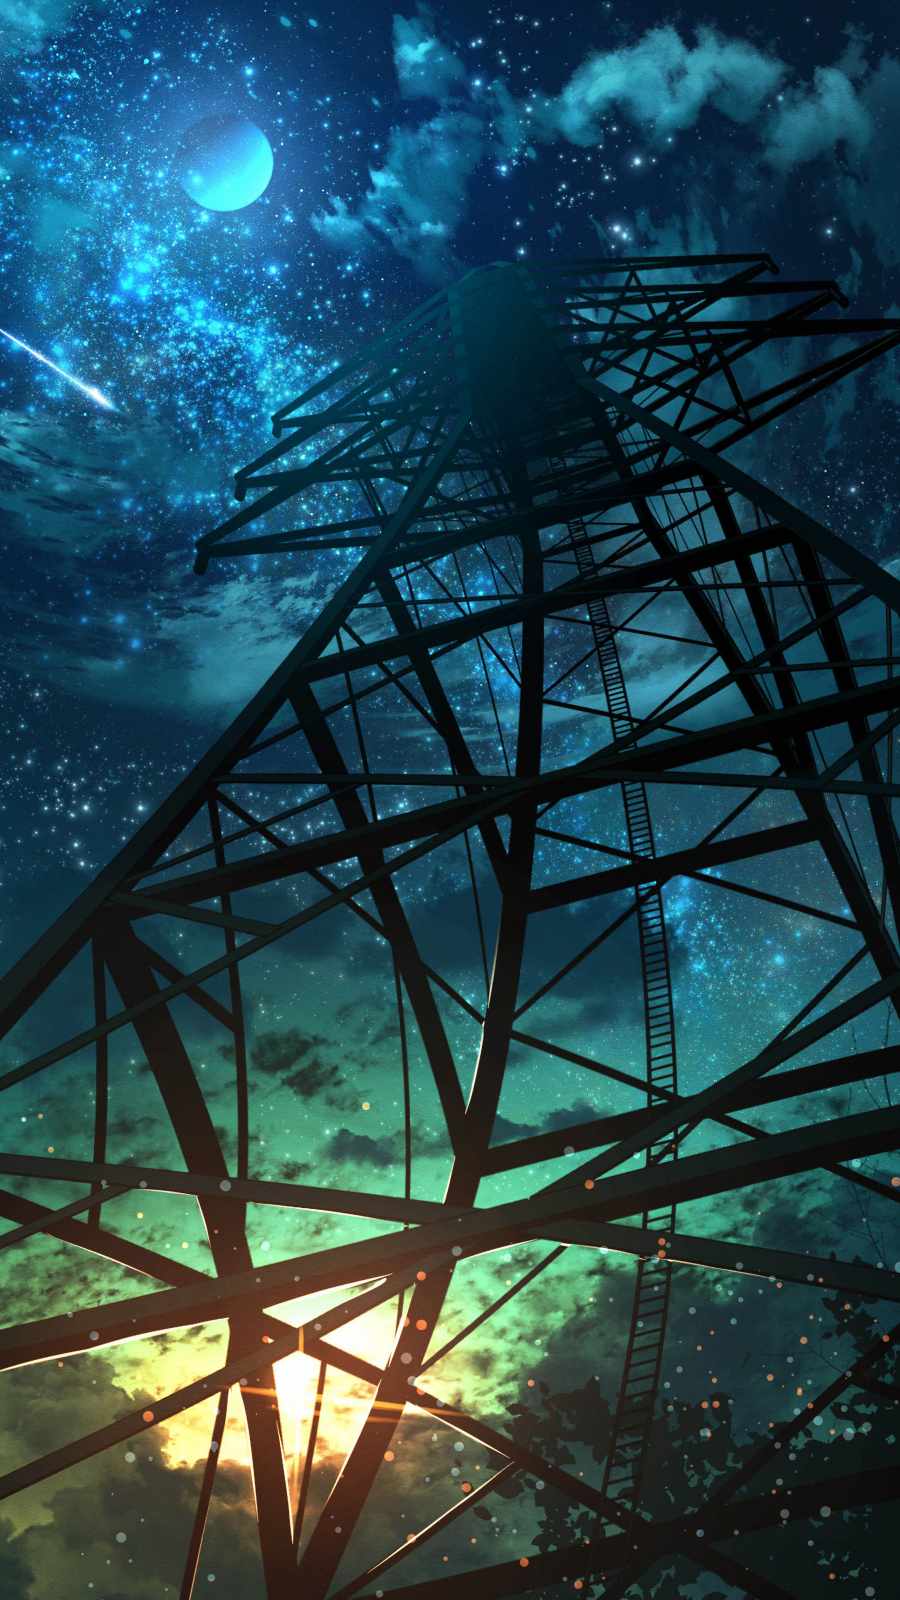 Anime Grid IPhone Wallpaper - IPhone Wallpapers : iPhone Wallpapers